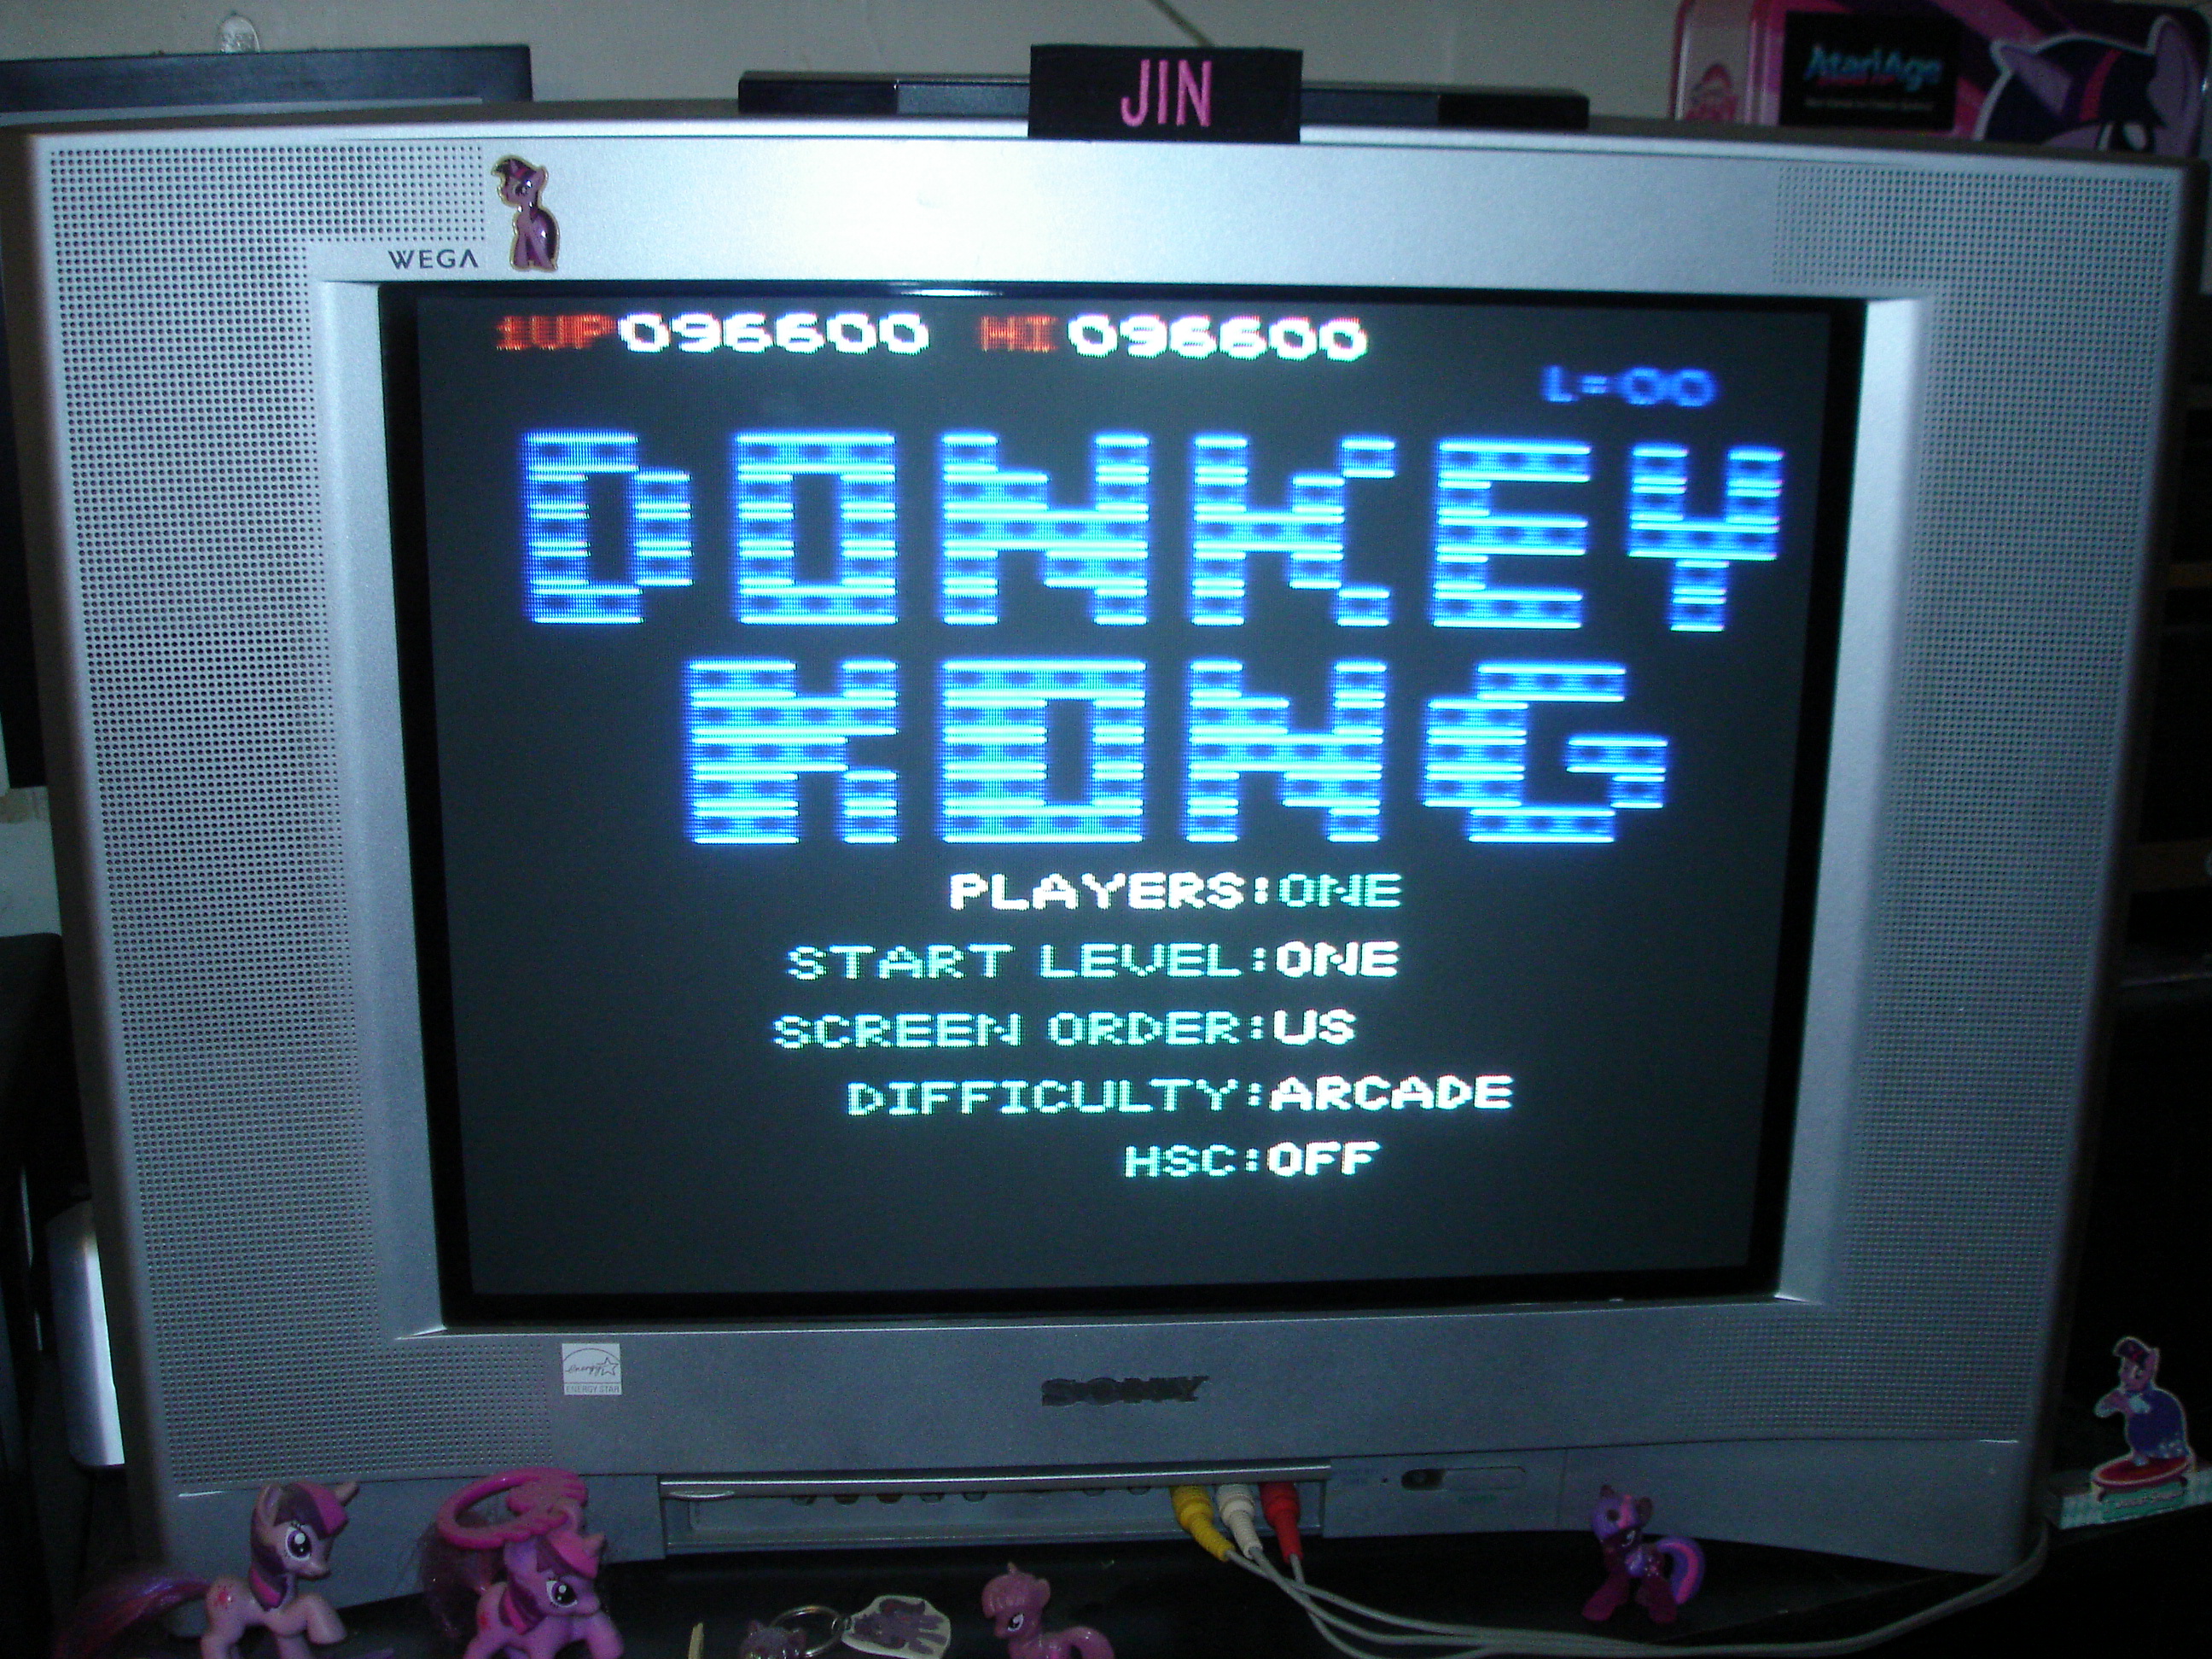 Donkey Kong PK [Start Level: One] [Screen Order: US] [Difficulty: Arcade] 96,600 points